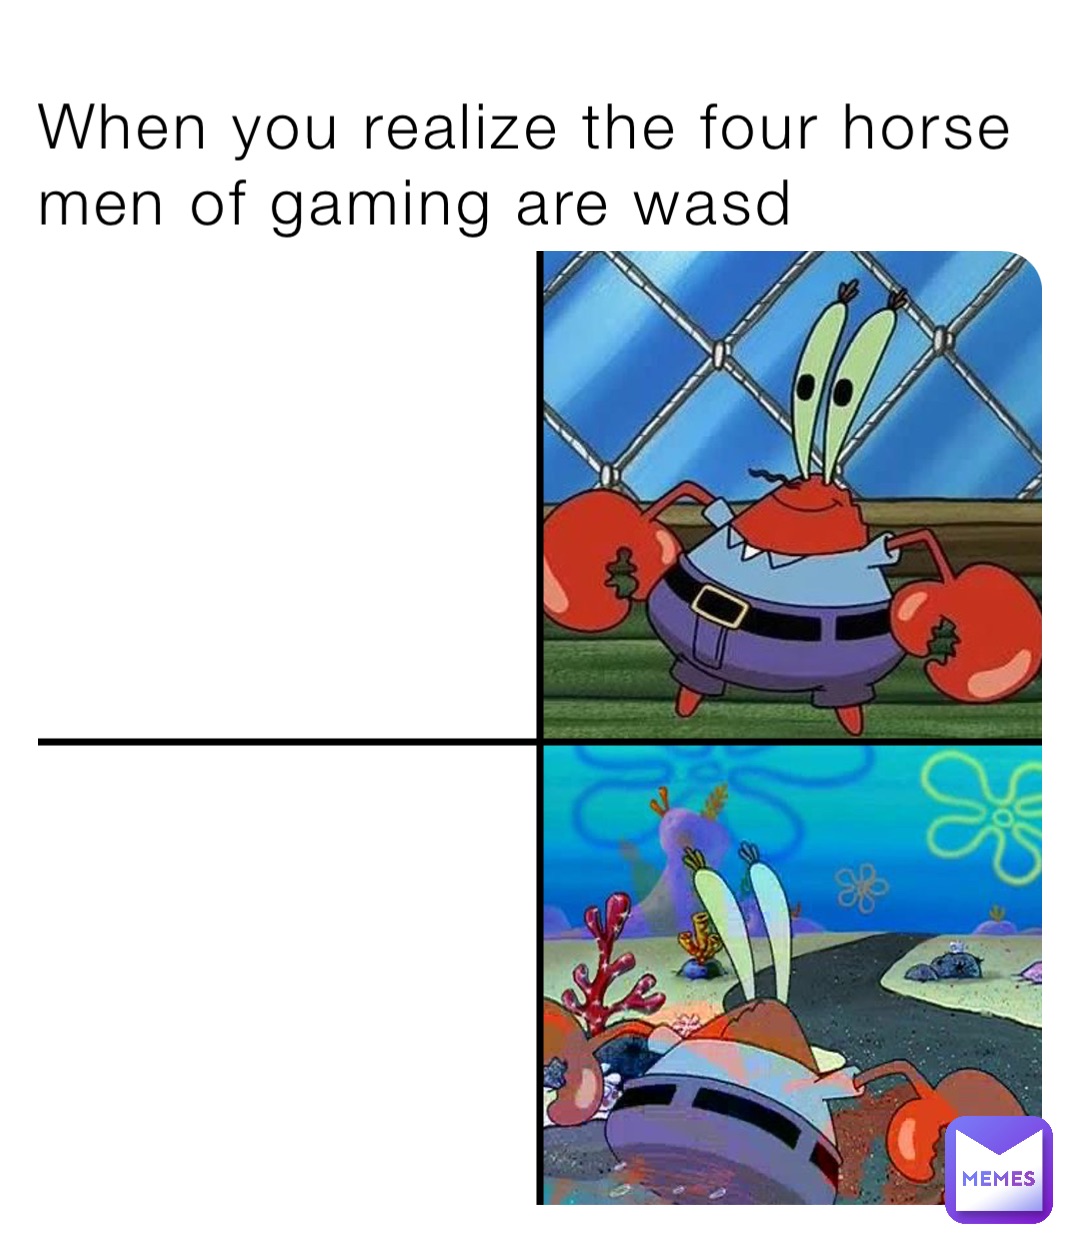 When you realize the four horse men of gaming are wasd